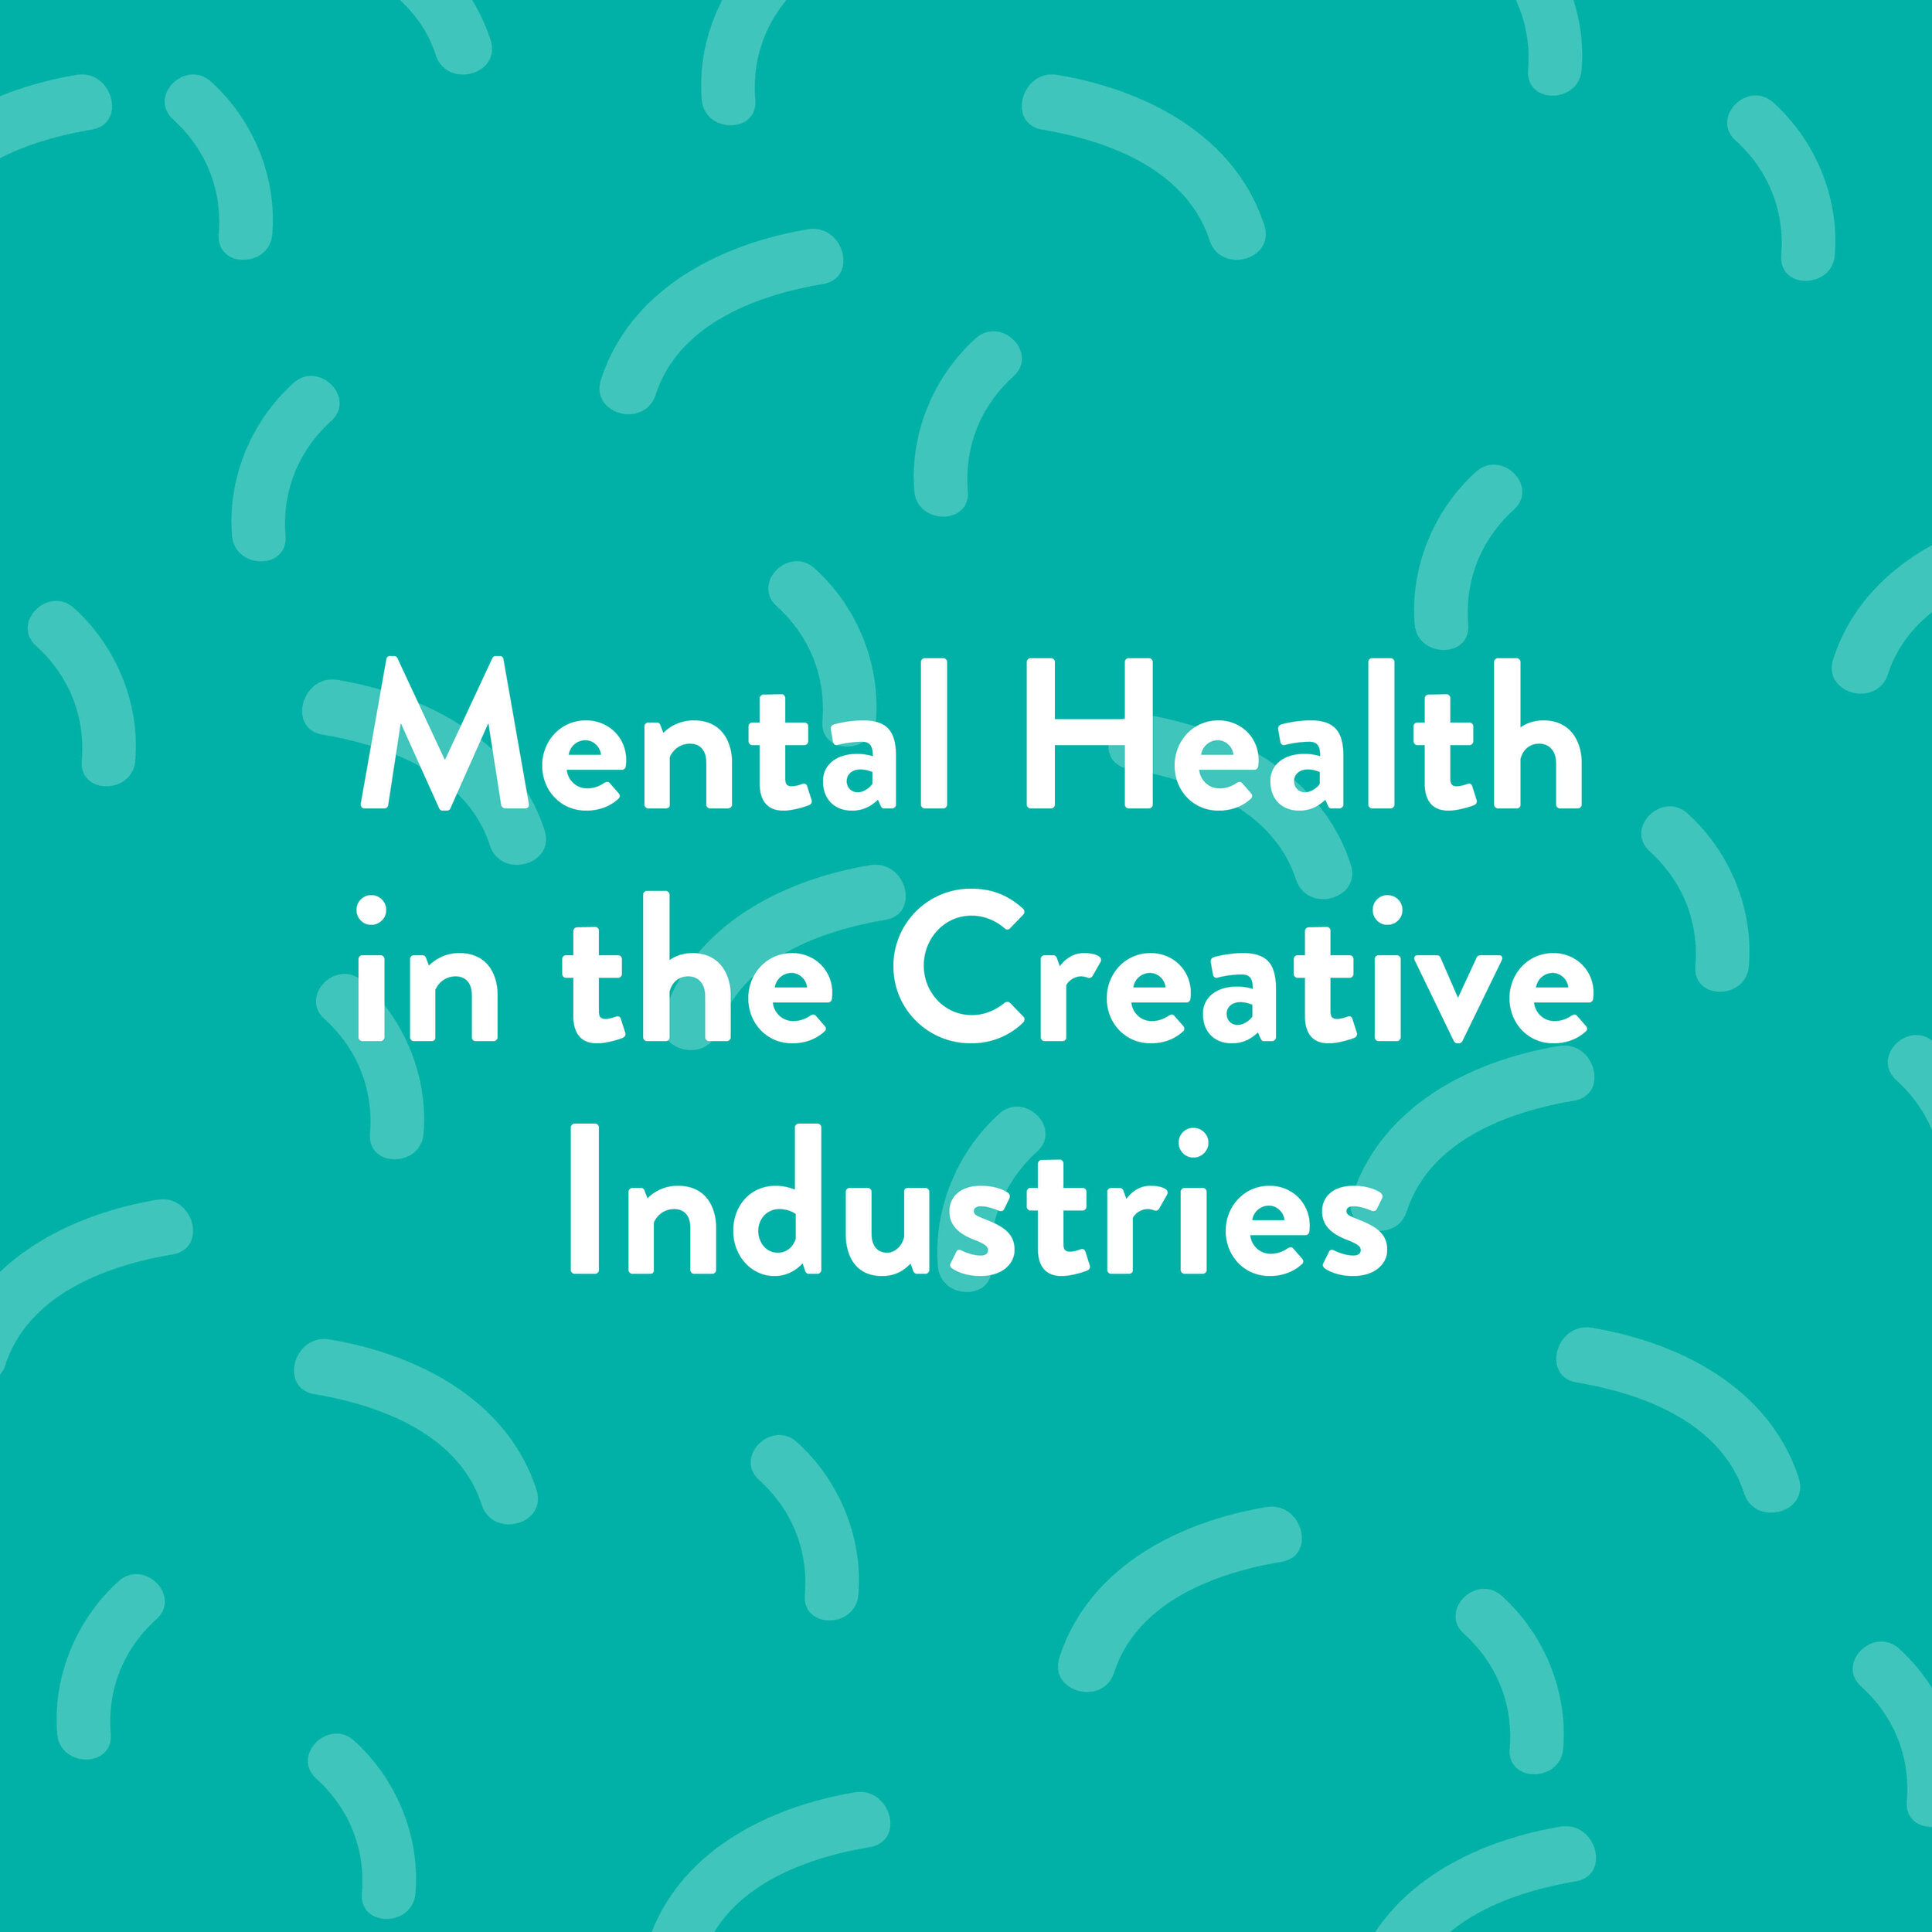 Mental Health in the Creative Industries